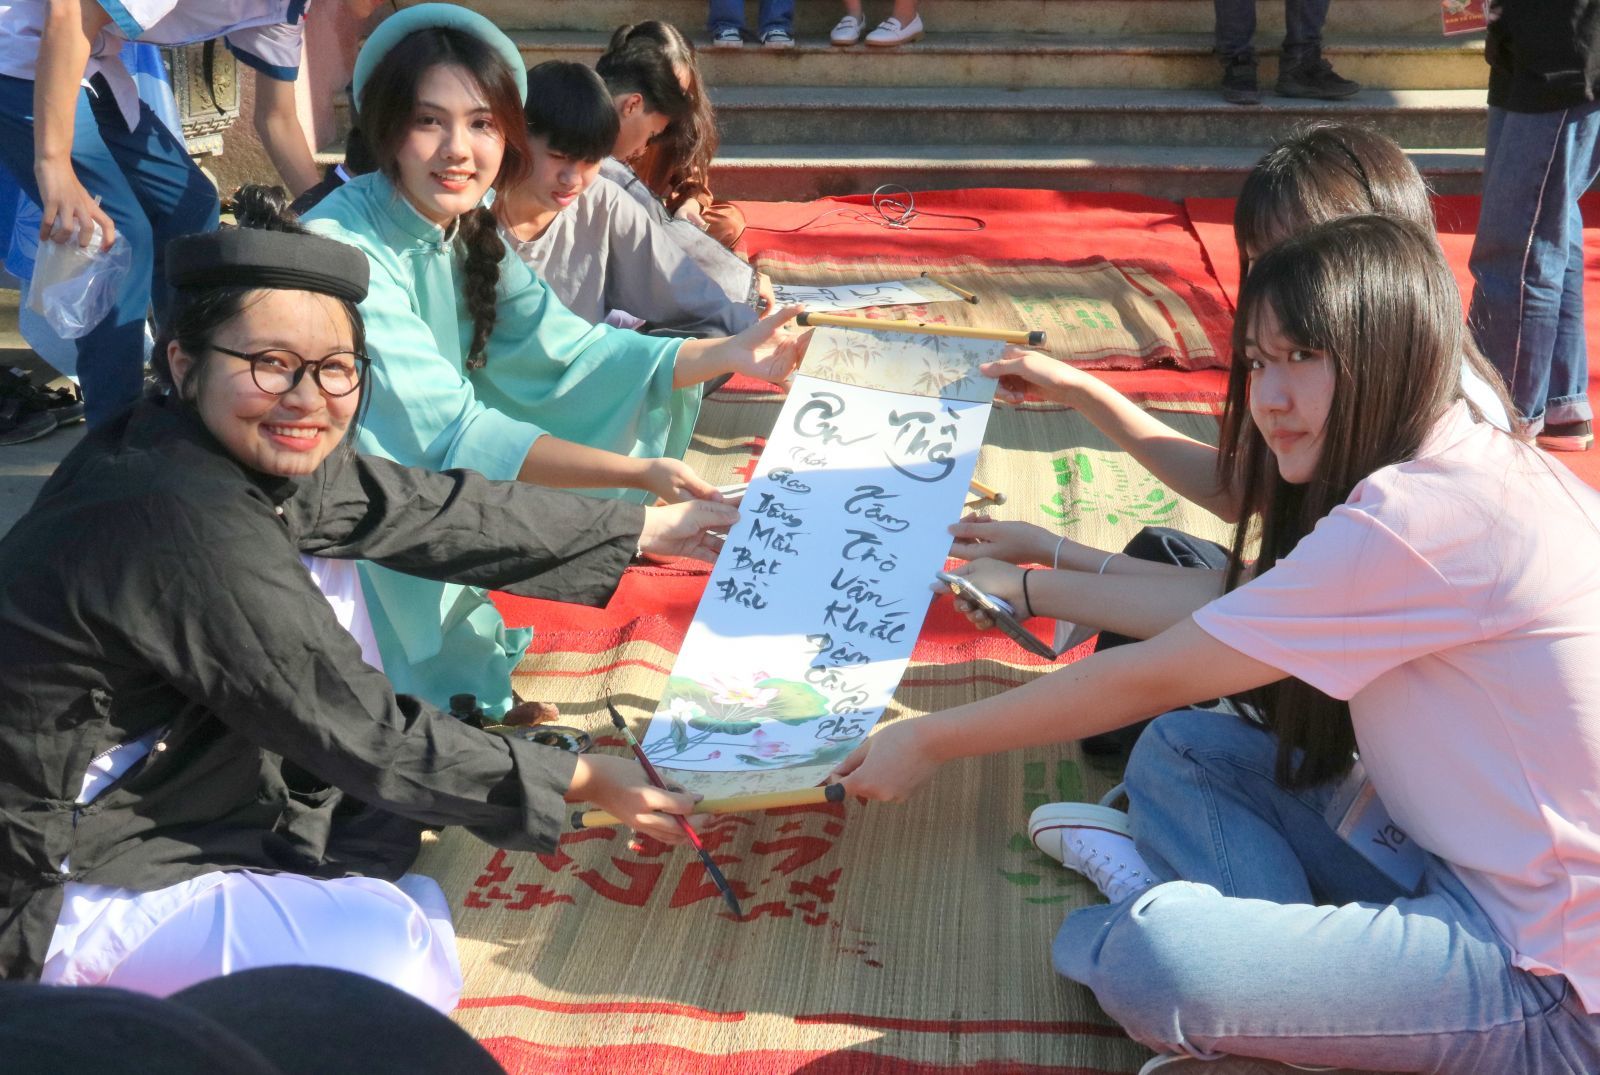 “The calligrapher” giving calligraphy words to Korean students